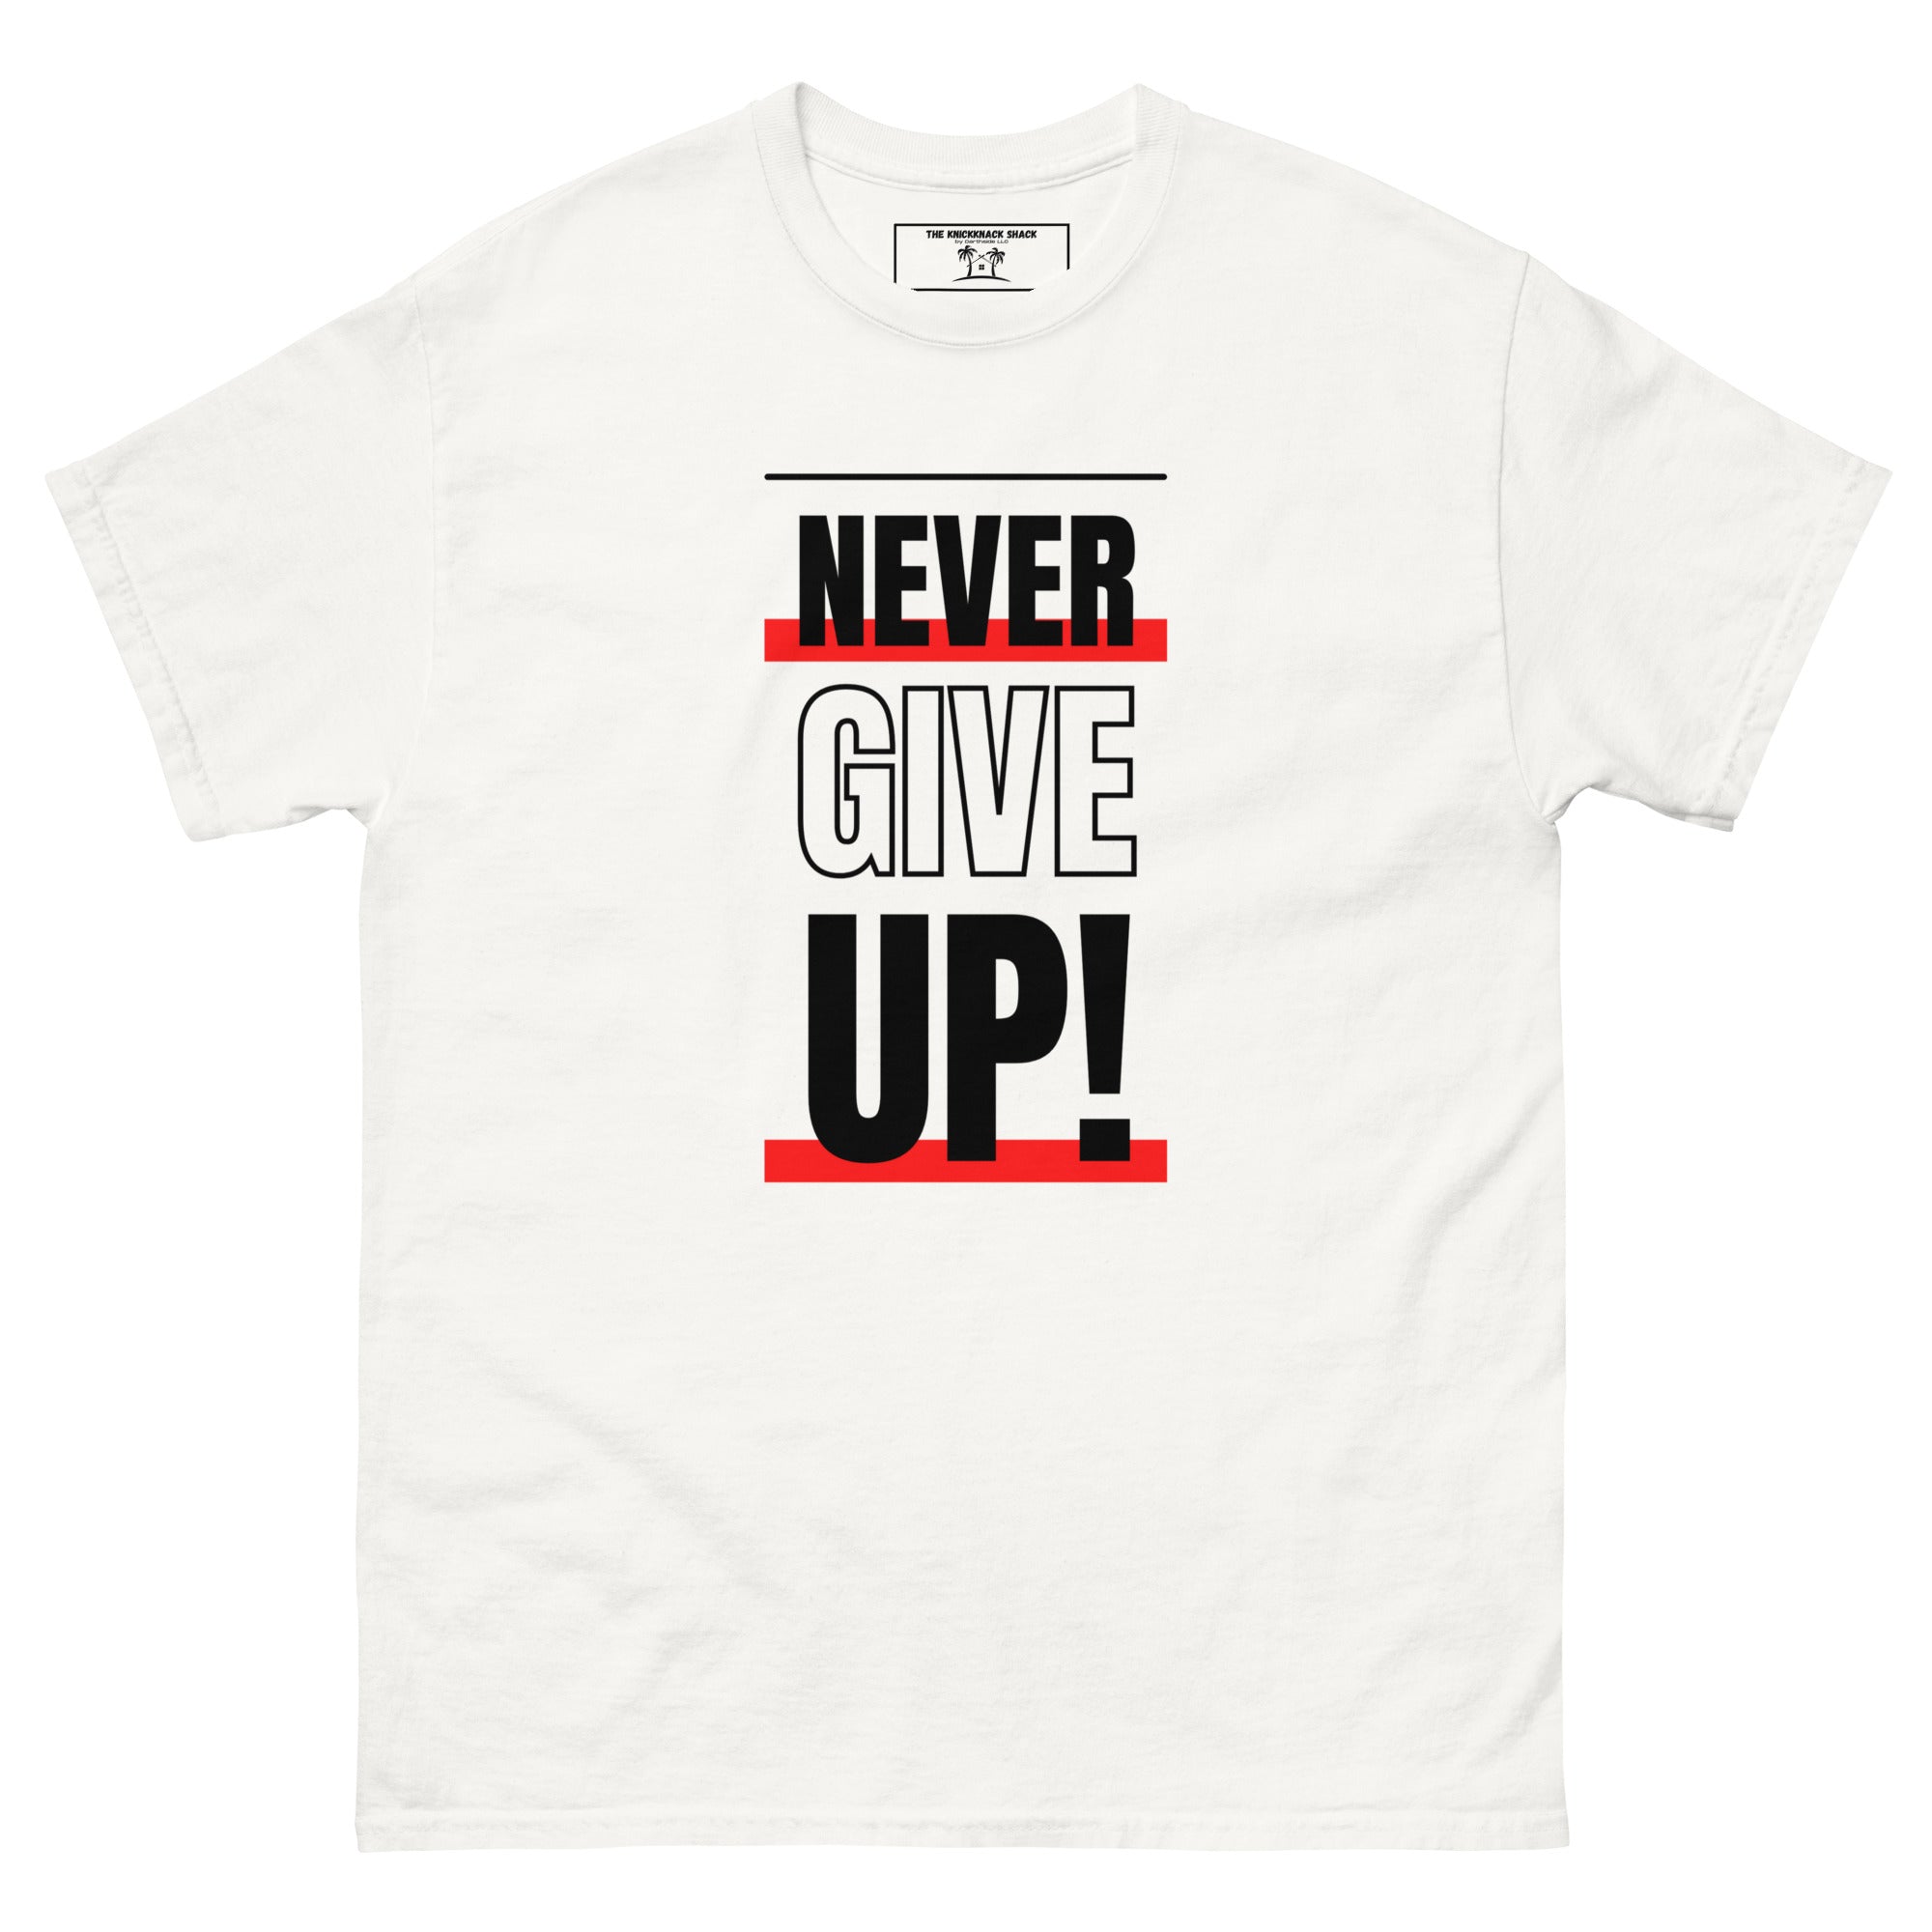 Classic Tee - Never Give Up (Light Colors)